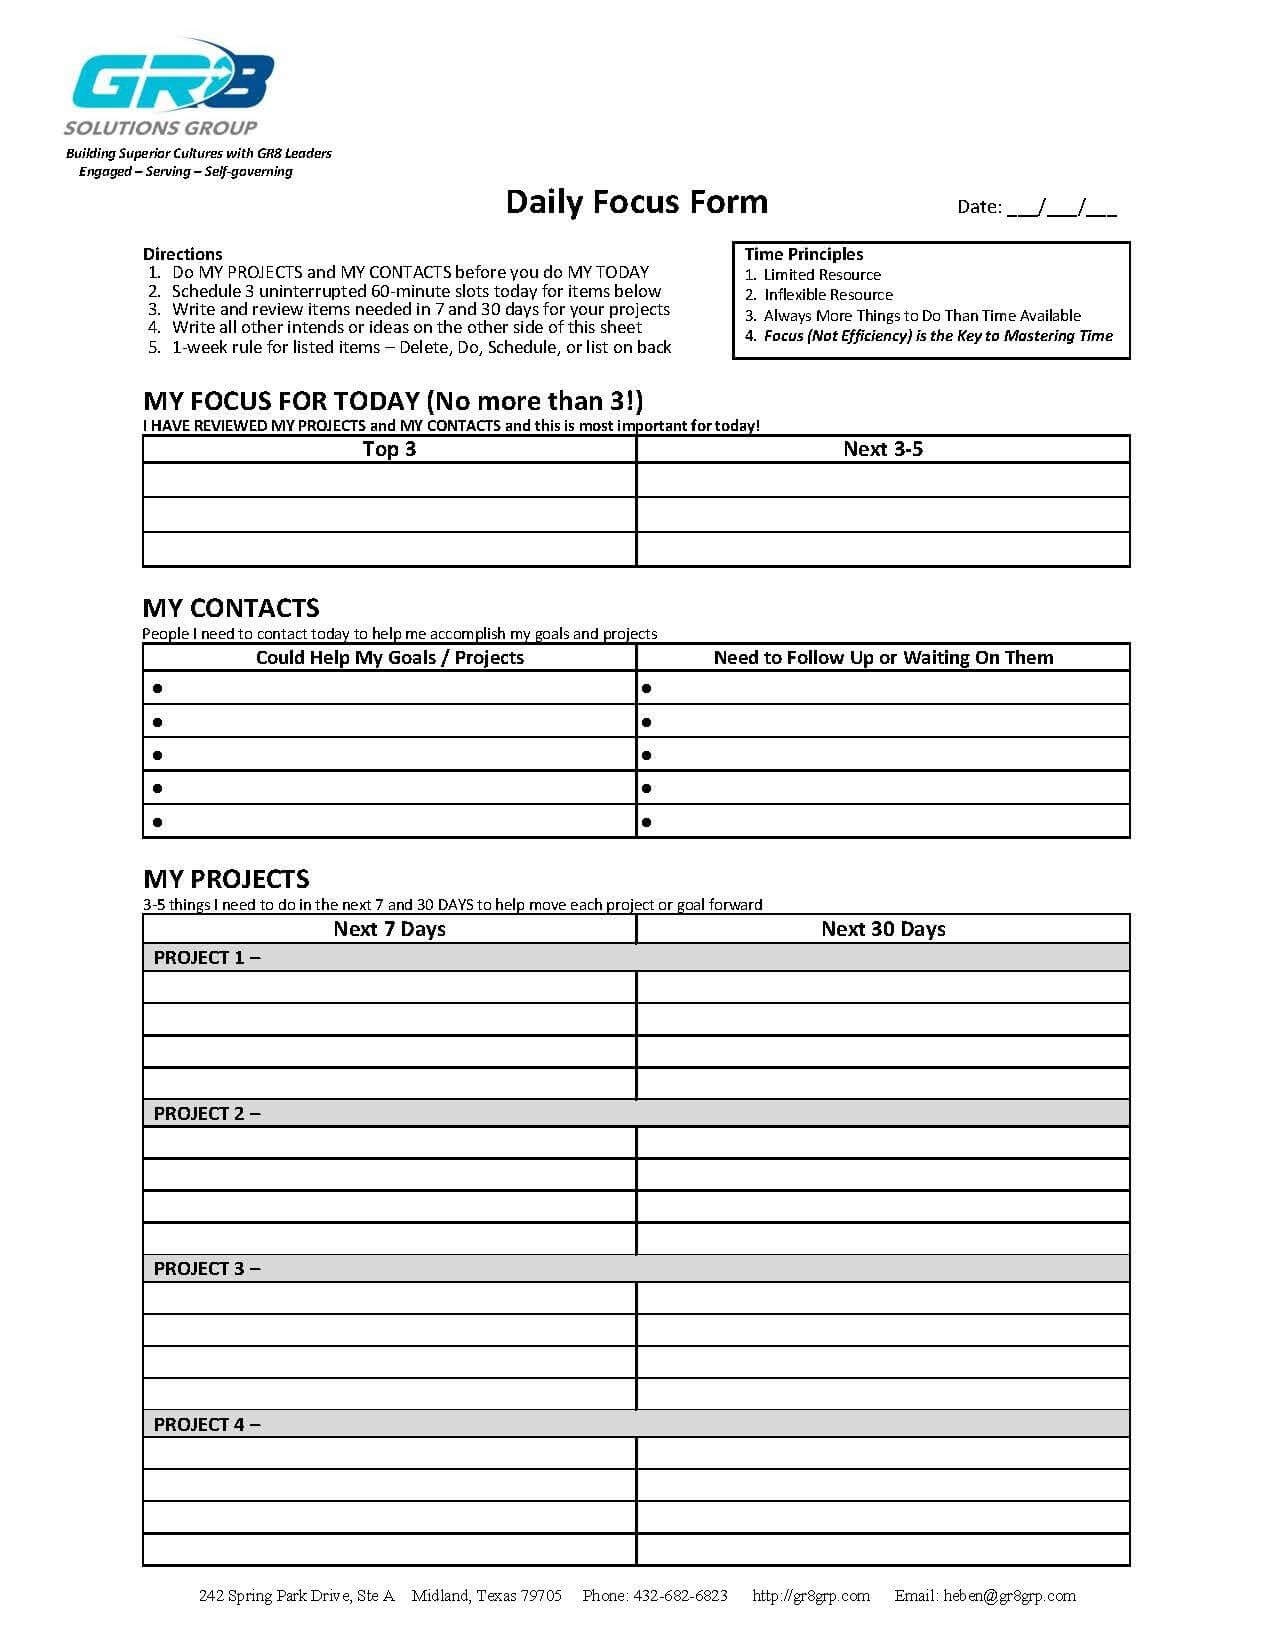 Daily Focus Form